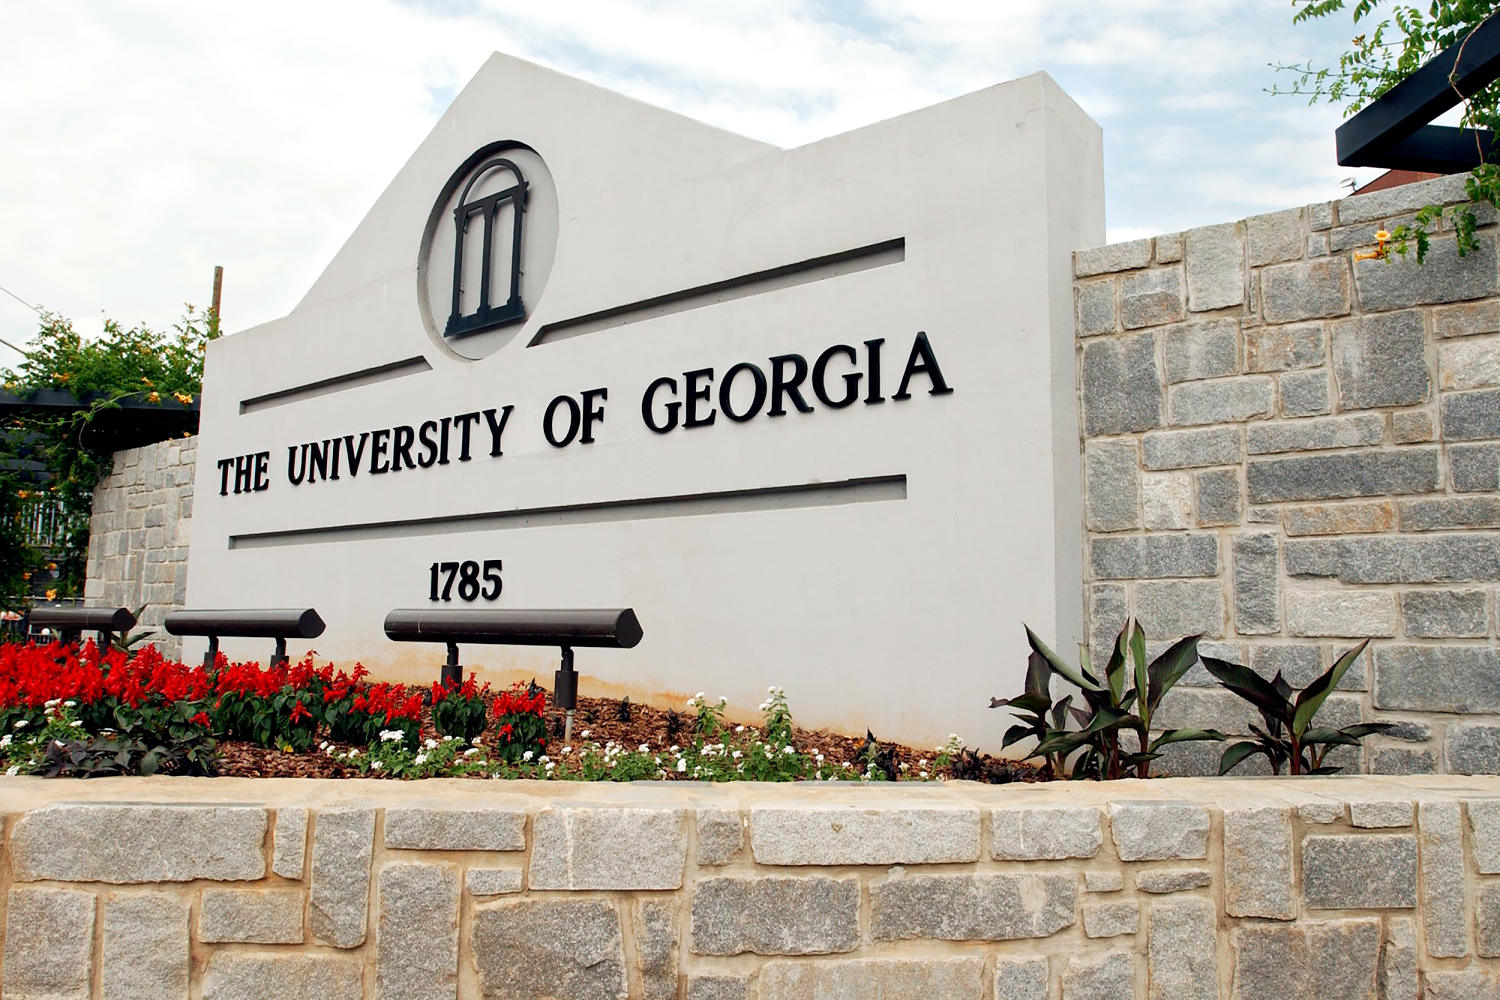 Suspect in custody after woman found dead on University of Georgia campus